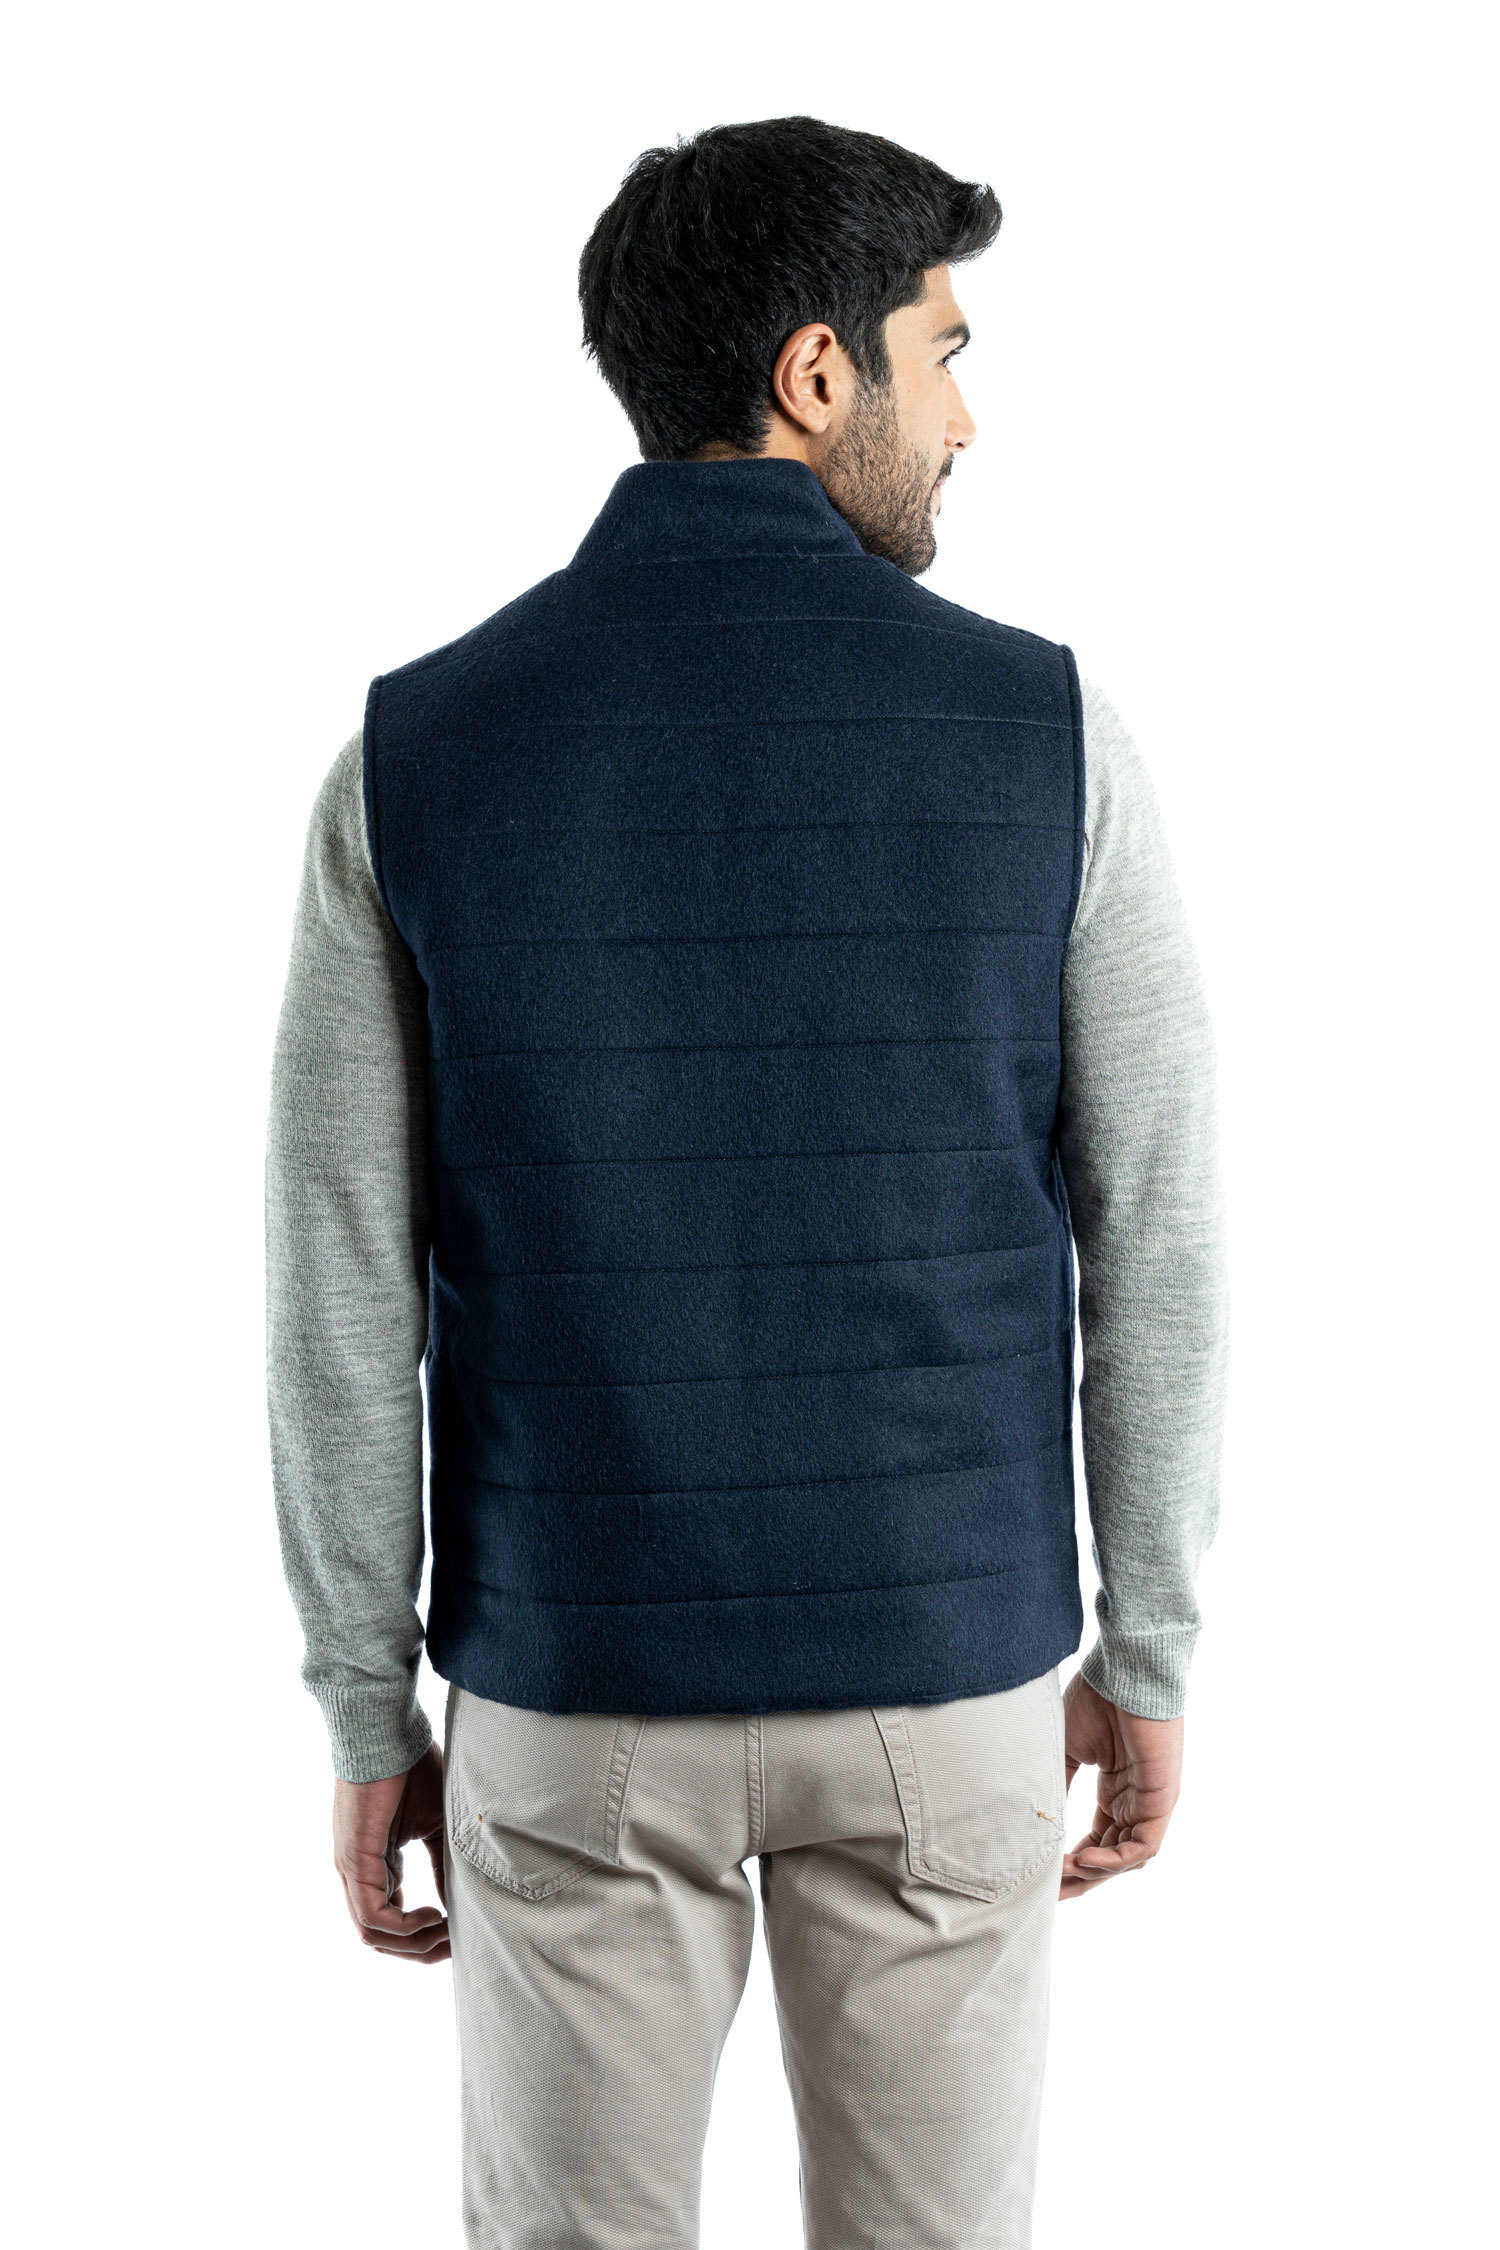 NEW - Mens Quilted Vest - Navy - 3